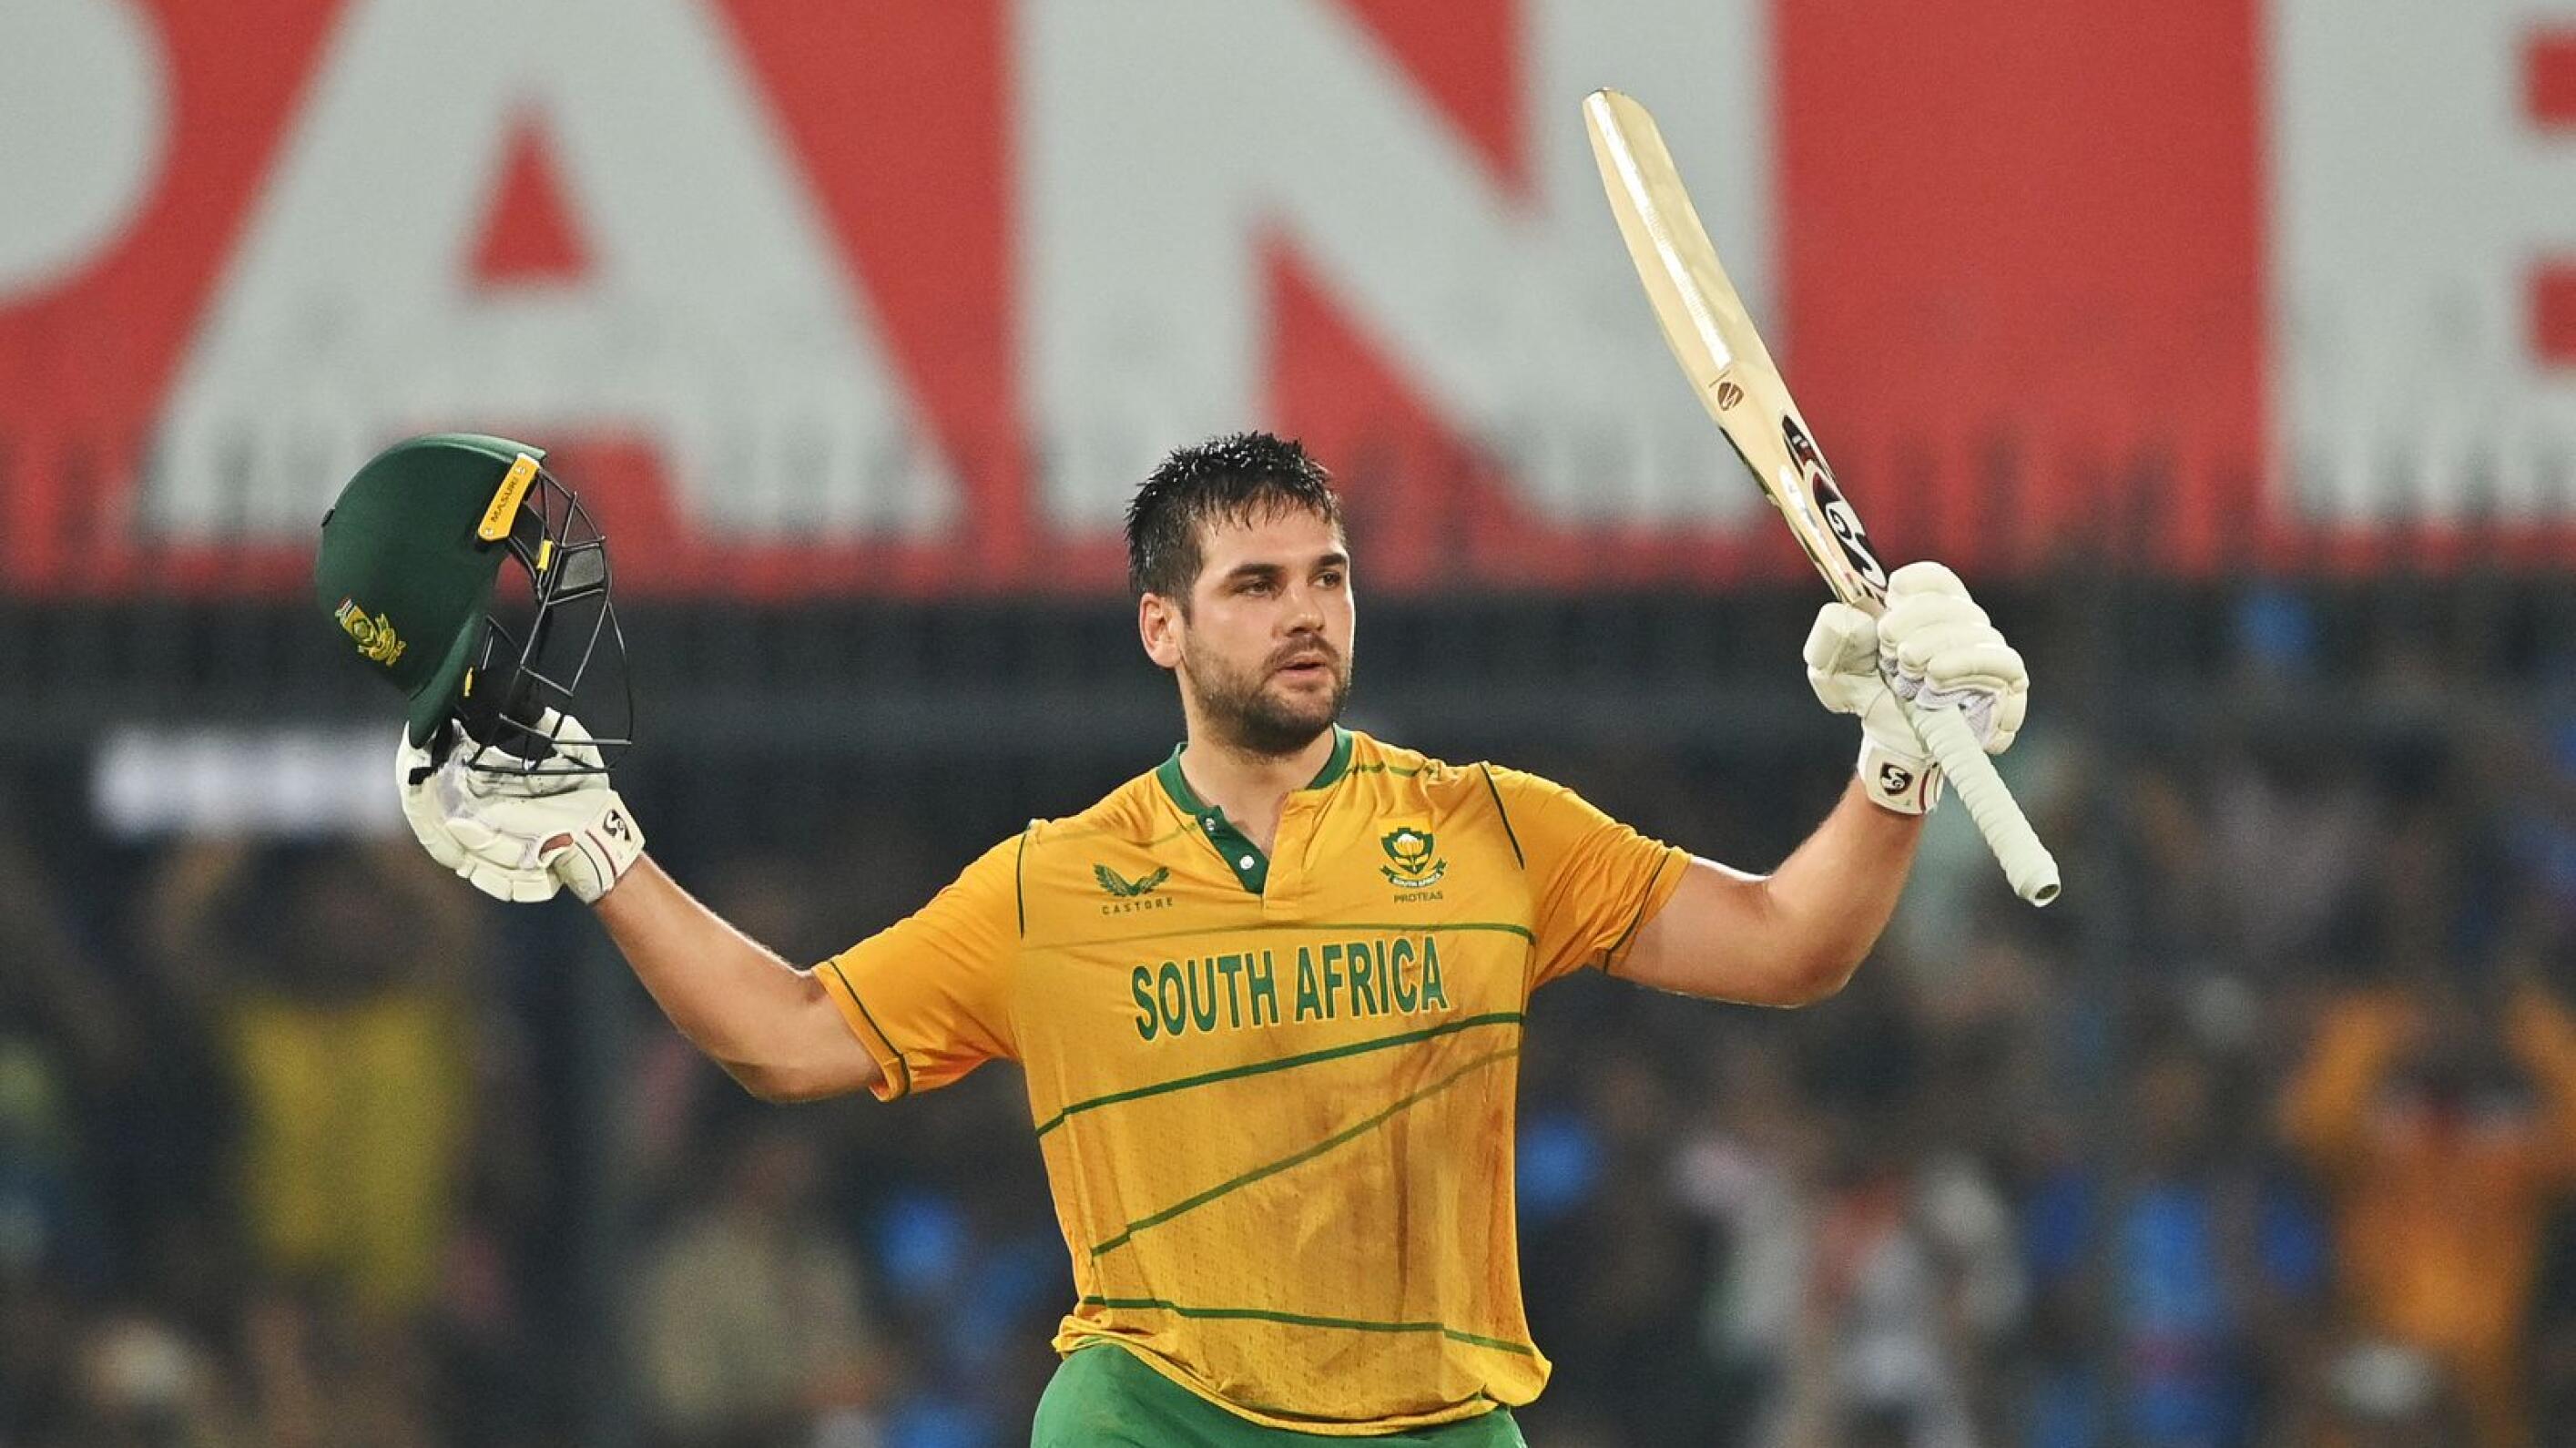 South Africa's Rilee Rossouw celebrates after scoring a century during the third and final Twenty20 international against India at the Holkar Cricket Stadium in Indore on Tuesday